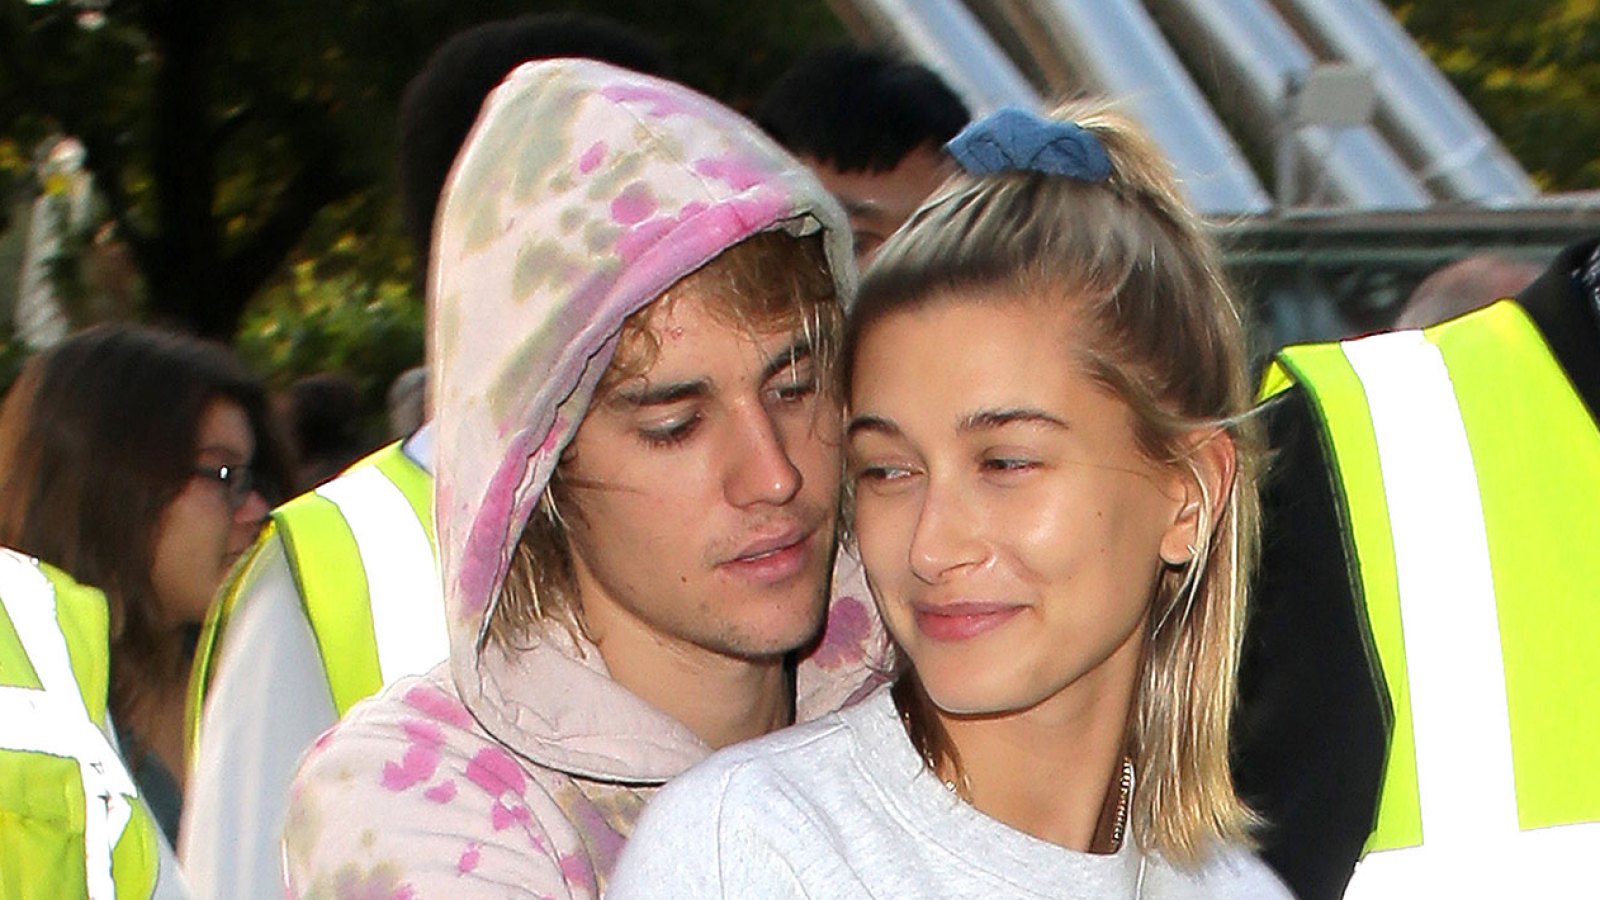 Justin Bieber and Hailey Baldwin Will 'Wait Until' the Singer Is In a 'More Stable Place' Before Having a Wedding